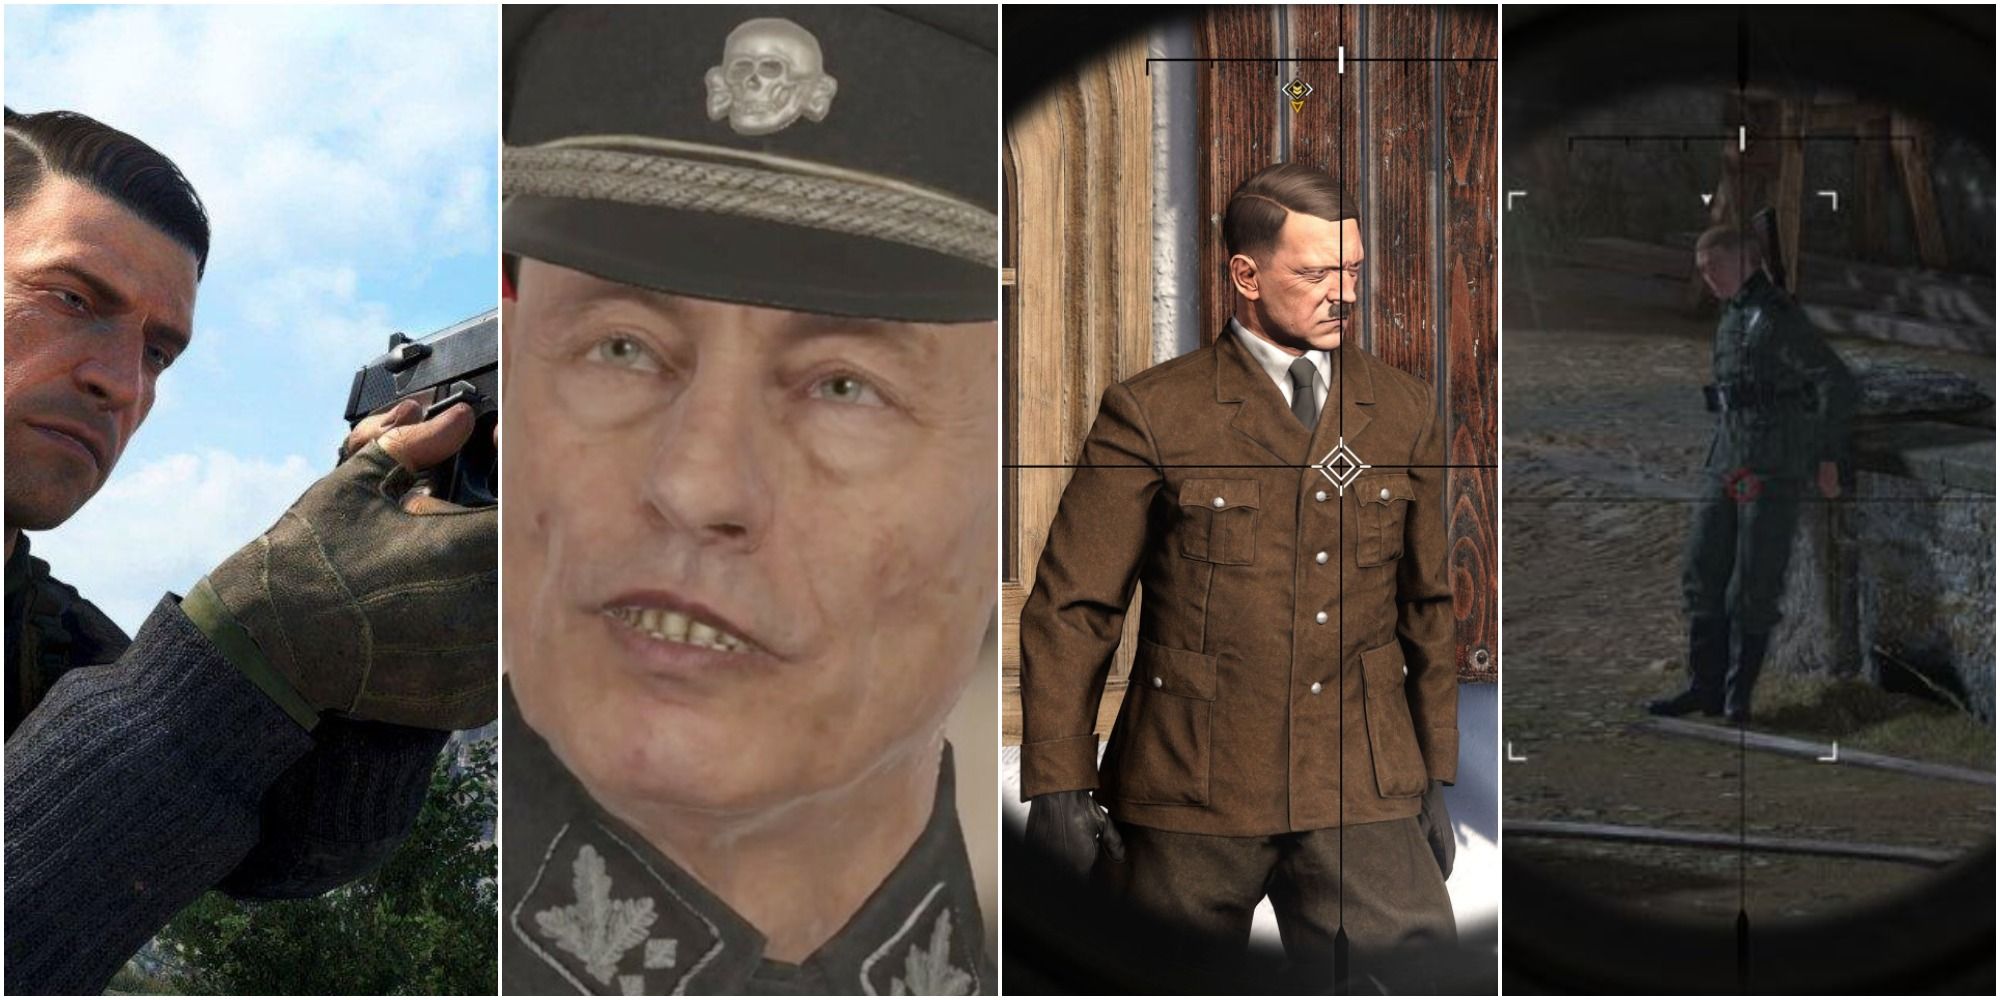 Sniper Elite 5 8 Hardest Achievements Featured Image showing Karl, Moller, Hitler and a testicle shot